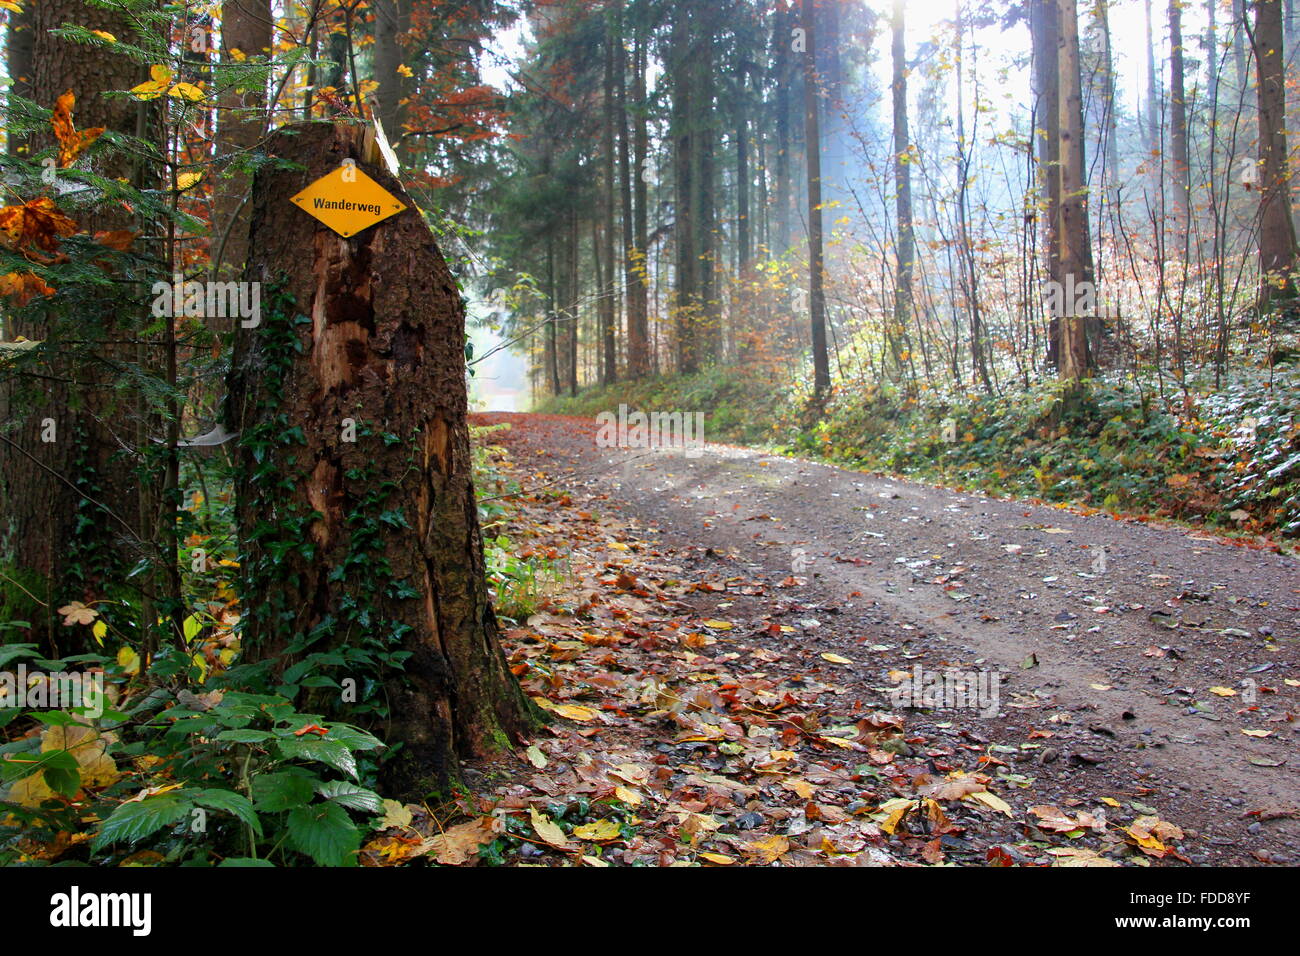 wanderweg written on a yellow direction sign on a forest path Stock Photo